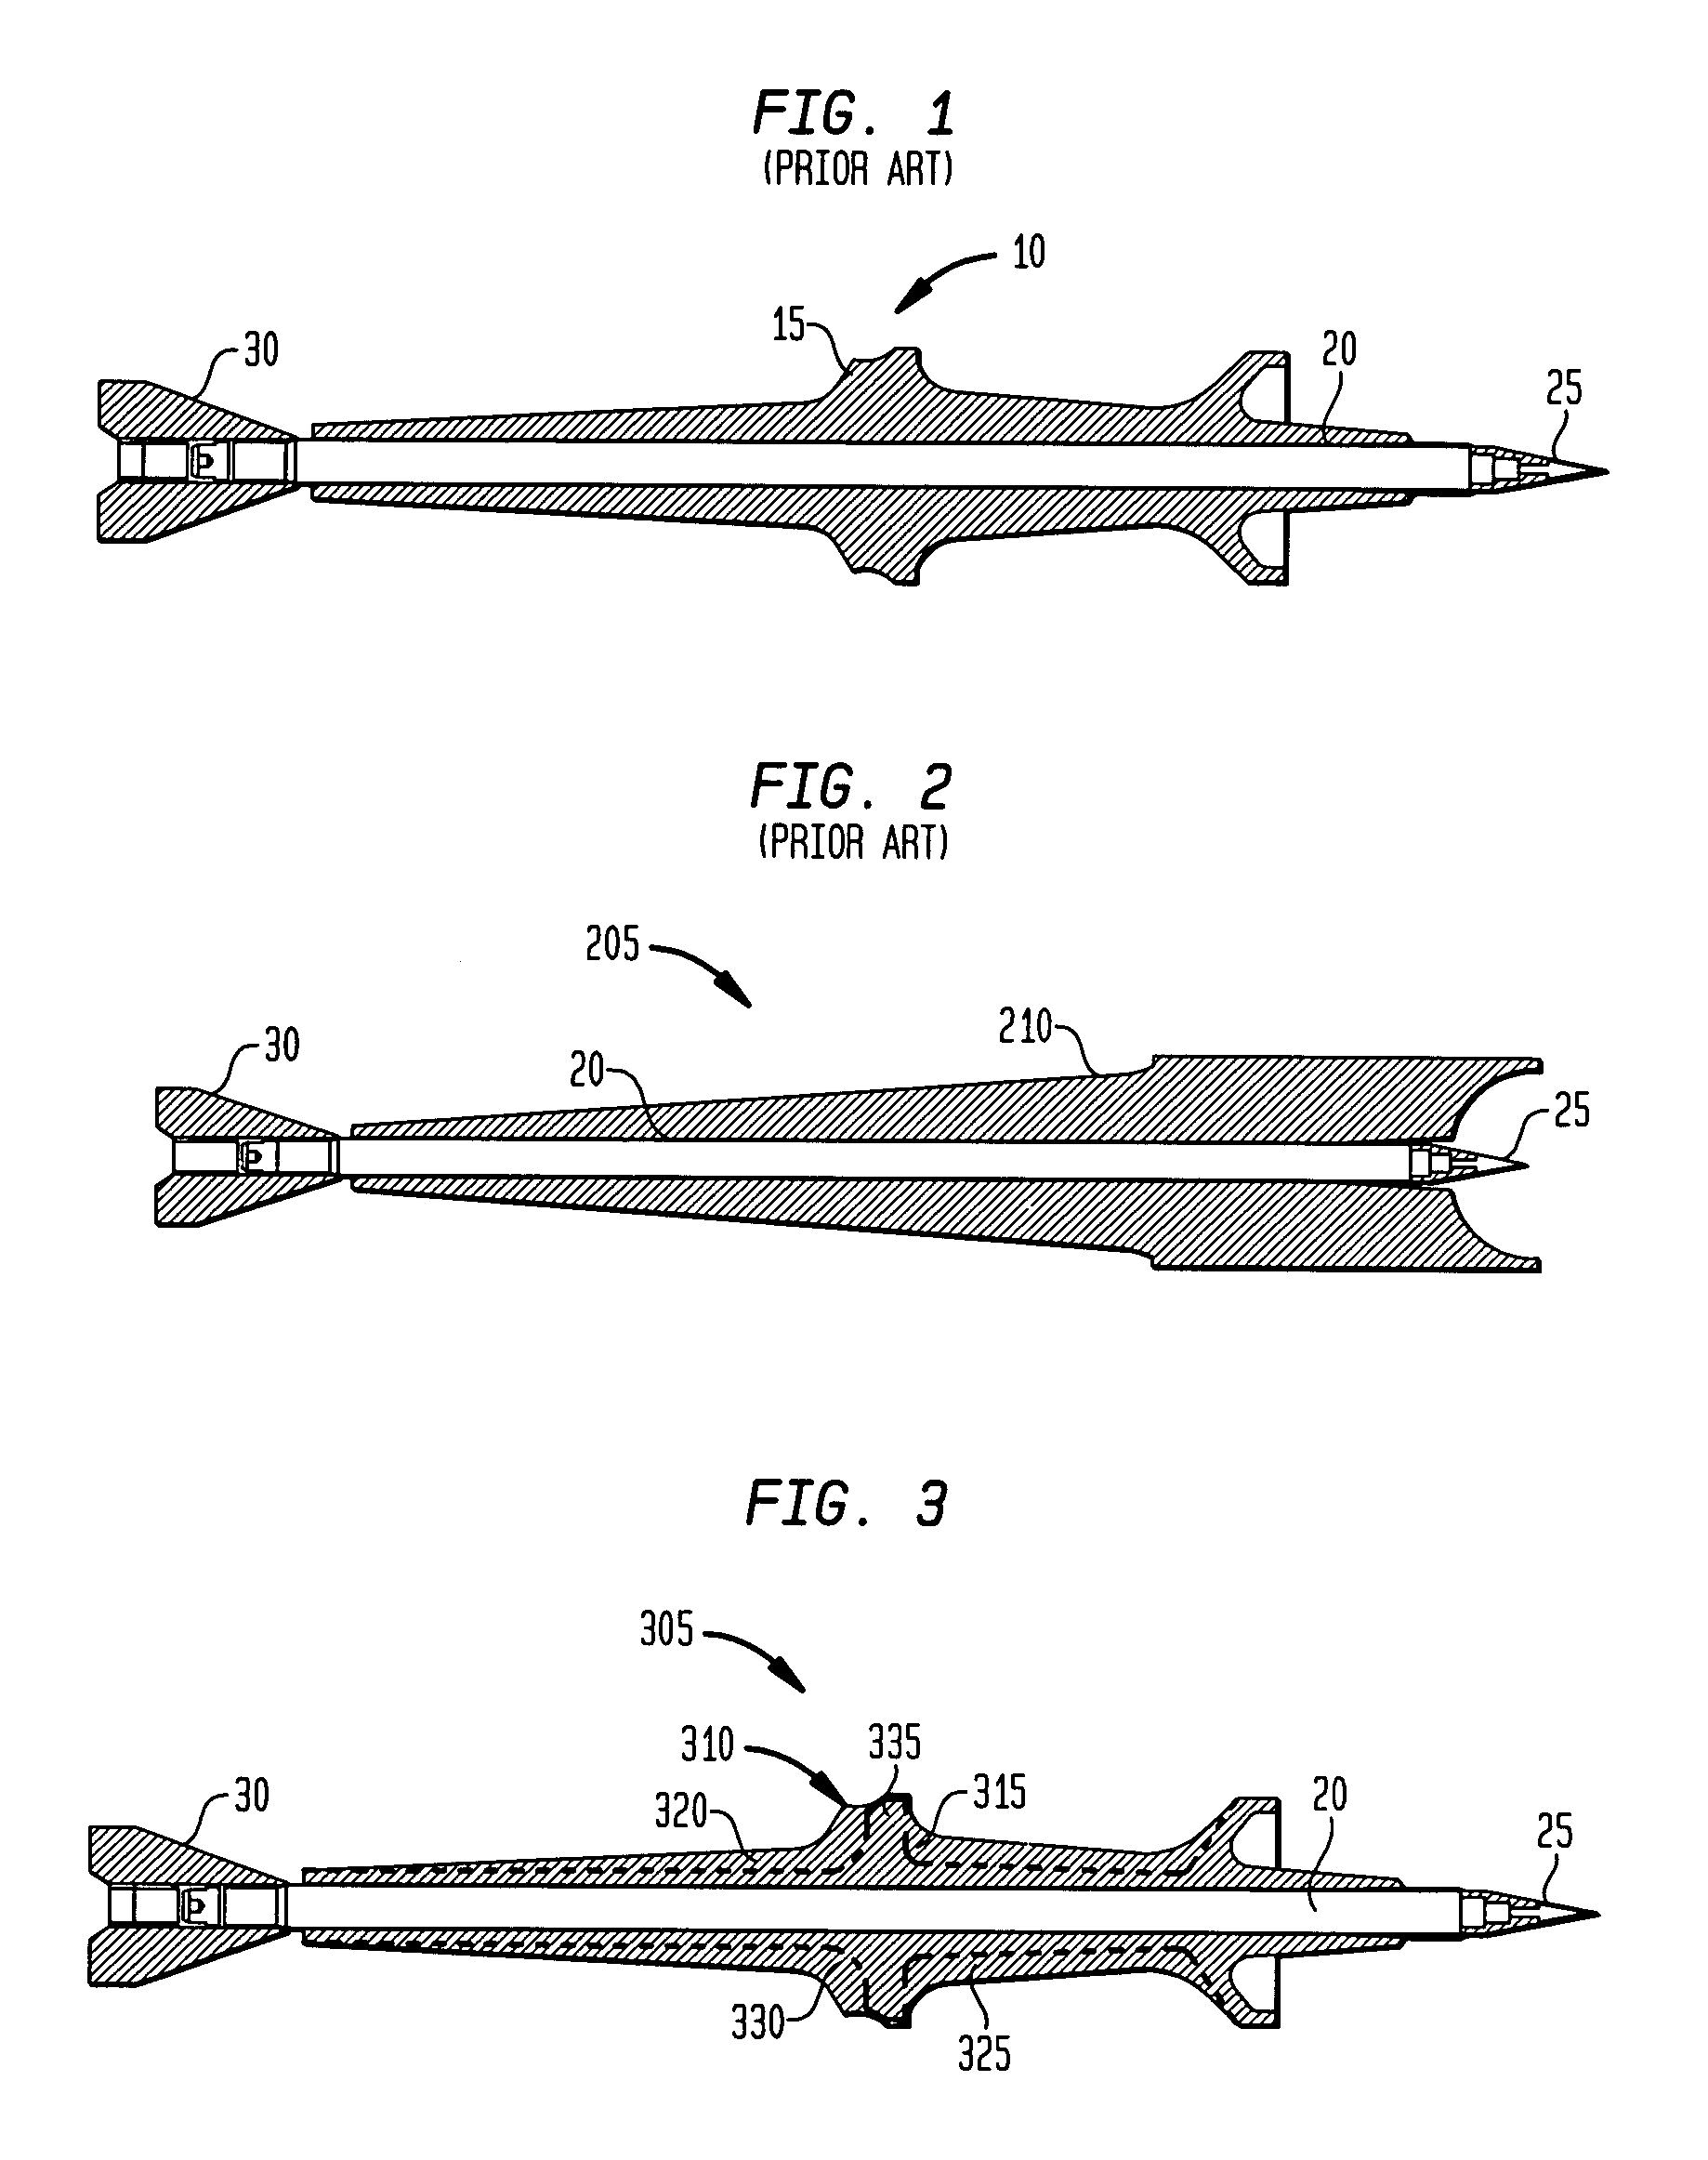 Sabot for reducing the parasitic weight of a kinetic energy projectile